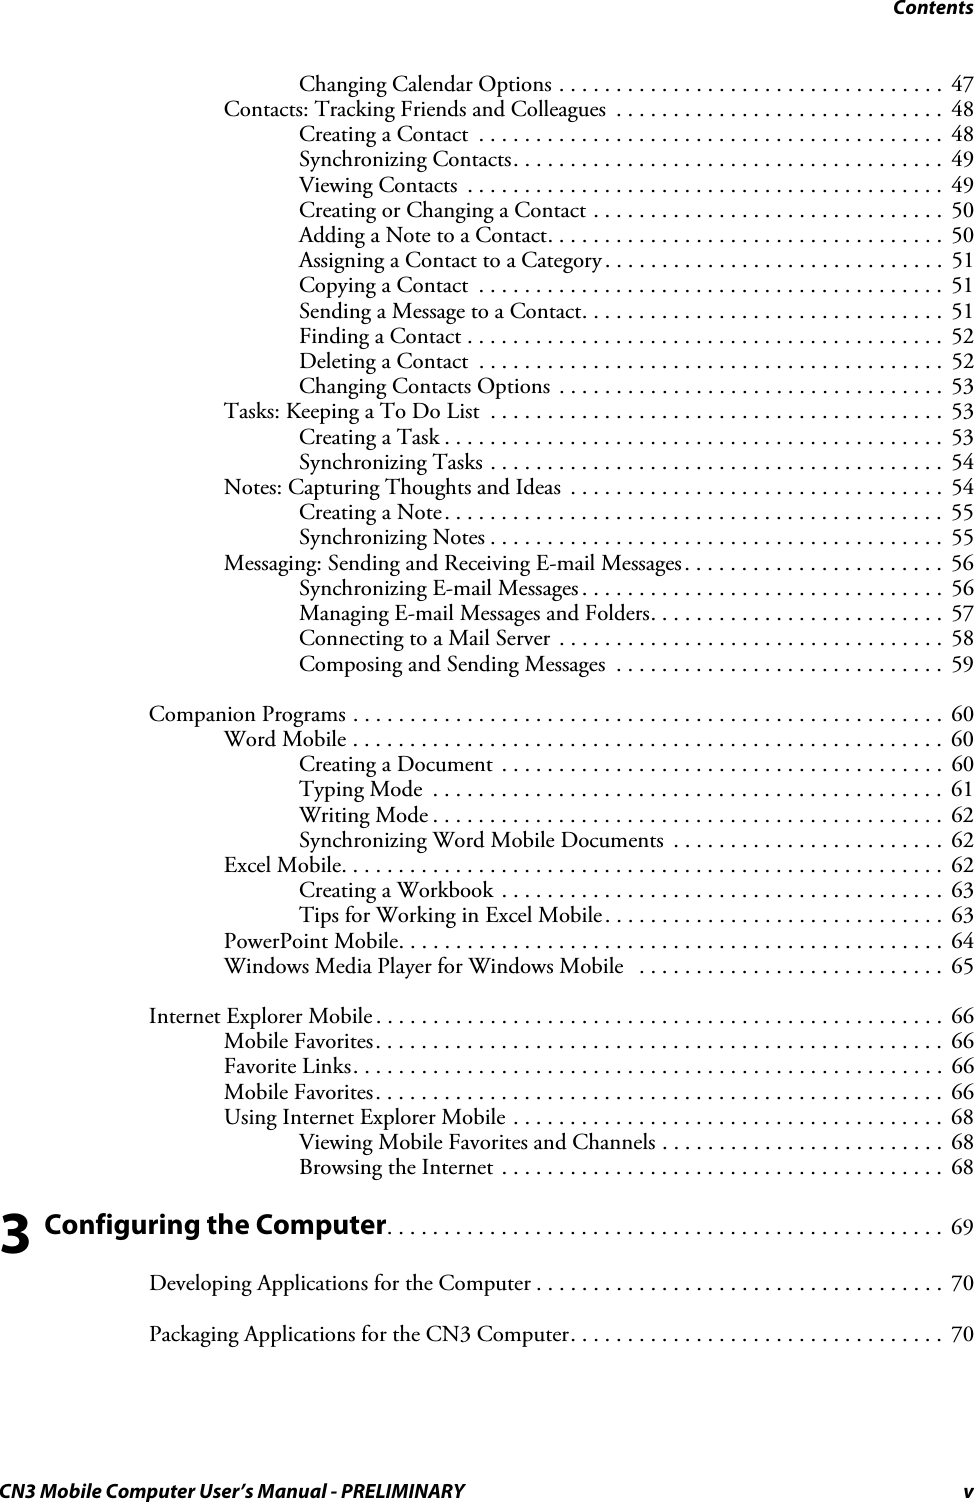 ContentsCN3 Mobile Computer User’s Manual - PRELIMINARY vChanging Calendar Options . . . . . . . . . . . . . . . . . . . . . . . . . . . . . . . . . .  47Contacts: Tracking Friends and Colleagues  . . . . . . . . . . . . . . . . . . . . . . . . . . . . .  48Creating a Contact  . . . . . . . . . . . . . . . . . . . . . . . . . . . . . . . . . . . . . . . . .  48Synchronizing Contacts. . . . . . . . . . . . . . . . . . . . . . . . . . . . . . . . . . . . . .  49Viewing Contacts  . . . . . . . . . . . . . . . . . . . . . . . . . . . . . . . . . . . . . . . . . .  49Creating or Changing a Contact . . . . . . . . . . . . . . . . . . . . . . . . . . . . . . .  50Adding a Note to a Contact. . . . . . . . . . . . . . . . . . . . . . . . . . . . . . . . . . .  50Assigning a Contact to a Category . . . . . . . . . . . . . . . . . . . . . . . . . . . . . .  51Copying a Contact  . . . . . . . . . . . . . . . . . . . . . . . . . . . . . . . . . . . . . . . . .  51Sending a Message to a Contact. . . . . . . . . . . . . . . . . . . . . . . . . . . . . . . .  51Finding a Contact . . . . . . . . . . . . . . . . . . . . . . . . . . . . . . . . . . . . . . . . . .  52Deleting a Contact  . . . . . . . . . . . . . . . . . . . . . . . . . . . . . . . . . . . . . . . . .  52Changing Contacts Options  . . . . . . . . . . . . . . . . . . . . . . . . . . . . . . . . . .  53Tasks: Keeping a To Do List  . . . . . . . . . . . . . . . . . . . . . . . . . . . . . . . . . . . . . . . .  53Creating a Task . . . . . . . . . . . . . . . . . . . . . . . . . . . . . . . . . . . . . . . . . . . .  53Synchronizing Tasks . . . . . . . . . . . . . . . . . . . . . . . . . . . . . . . . . . . . . . . .  54Notes: Capturing Thoughts and Ideas  . . . . . . . . . . . . . . . . . . . . . . . . . . . . . . . . .  54Creating a Note. . . . . . . . . . . . . . . . . . . . . . . . . . . . . . . . . . . . . . . . . . . .  55Synchronizing Notes . . . . . . . . . . . . . . . . . . . . . . . . . . . . . . . . . . . . . . . .  55Messaging: Sending and Receiving E-mail Messages . . . . . . . . . . . . . . . . . . . . . . .  56Synchronizing E-mail Messages . . . . . . . . . . . . . . . . . . . . . . . . . . . . . . . .  56Managing E-mail Messages and Folders. . . . . . . . . . . . . . . . . . . . . . . . . .  57Connecting to a Mail Server  . . . . . . . . . . . . . . . . . . . . . . . . . . . . . . . . . .  58Composing and Sending Messages  . . . . . . . . . . . . . . . . . . . . . . . . . . . . .  59Companion Programs . . . . . . . . . . . . . . . . . . . . . . . . . . . . . . . . . . . . . . . . . . . . . . . . . . . .  60Word Mobile . . . . . . . . . . . . . . . . . . . . . . . . . . . . . . . . . . . . . . . . . . . . . . . . . . . .  60Creating a Document . . . . . . . . . . . . . . . . . . . . . . . . . . . . . . . . . . . . . . .  60Typing Mode  . . . . . . . . . . . . . . . . . . . . . . . . . . . . . . . . . . . . . . . . . . . . .  61Writing Mode . . . . . . . . . . . . . . . . . . . . . . . . . . . . . . . . . . . . . . . . . . . . .  62Synchronizing Word Mobile Documents  . . . . . . . . . . . . . . . . . . . . . . . .  62Excel Mobile. . . . . . . . . . . . . . . . . . . . . . . . . . . . . . . . . . . . . . . . . . . . . . . . . . . . .  62Creating a Workbook . . . . . . . . . . . . . . . . . . . . . . . . . . . . . . . . . . . . . . .  63Tips for Working in Excel Mobile. . . . . . . . . . . . . . . . . . . . . . . . . . . . . .  63PowerPoint Mobile. . . . . . . . . . . . . . . . . . . . . . . . . . . . . . . . . . . . . . . . . . . . . . . .  64Windows Media Player for Windows Mobile   . . . . . . . . . . . . . . . . . . . . . . . . . . .  65Internet Explorer Mobile . . . . . . . . . . . . . . . . . . . . . . . . . . . . . . . . . . . . . . . . . . . . . . . . . .  66Mobile Favorites. . . . . . . . . . . . . . . . . . . . . . . . . . . . . . . . . . . . . . . . . . . . . . . . . .  66Favorite Links. . . . . . . . . . . . . . . . . . . . . . . . . . . . . . . . . . . . . . . . . . . . . . . . . . . .  66Mobile Favorites. . . . . . . . . . . . . . . . . . . . . . . . . . . . . . . . . . . . . . . . . . . . . . . . . .  66Using Internet Explorer Mobile . . . . . . . . . . . . . . . . . . . . . . . . . . . . . . . . . . . . . .  68Viewing Mobile Favorites and Channels . . . . . . . . . . . . . . . . . . . . . . . . .  68Browsing the Internet . . . . . . . . . . . . . . . . . . . . . . . . . . . . . . . . . . . . . . .  683 Configuring the Computer. . . . . . . . . . . . . . . . . . . . . . . . . . . . . . . . . . . . . . . . . . . . . . . . .  69Developing Applications for the Computer . . . . . . . . . . . . . . . . . . . . . . . . . . . . . . . . . . . .  70Packaging Applications for the CN3 Computer. . . . . . . . . . . . . . . . . . . . . . . . . . . . . . . . .  70